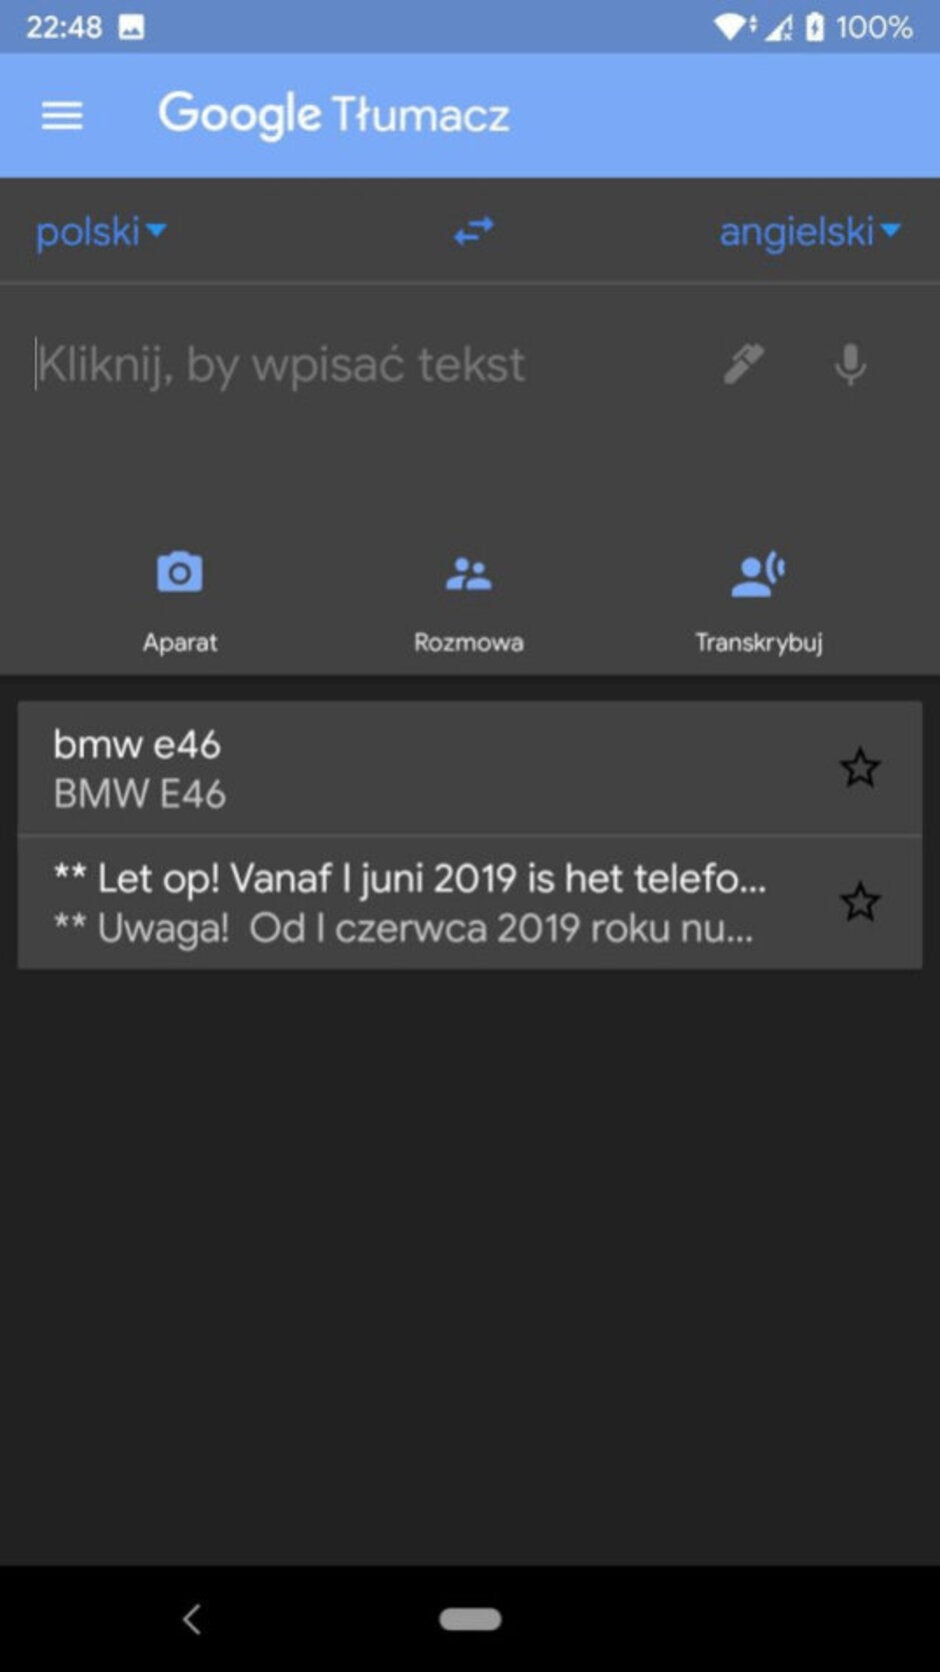 Dark mode is finally coming to Google Translate on Android and iOS devices